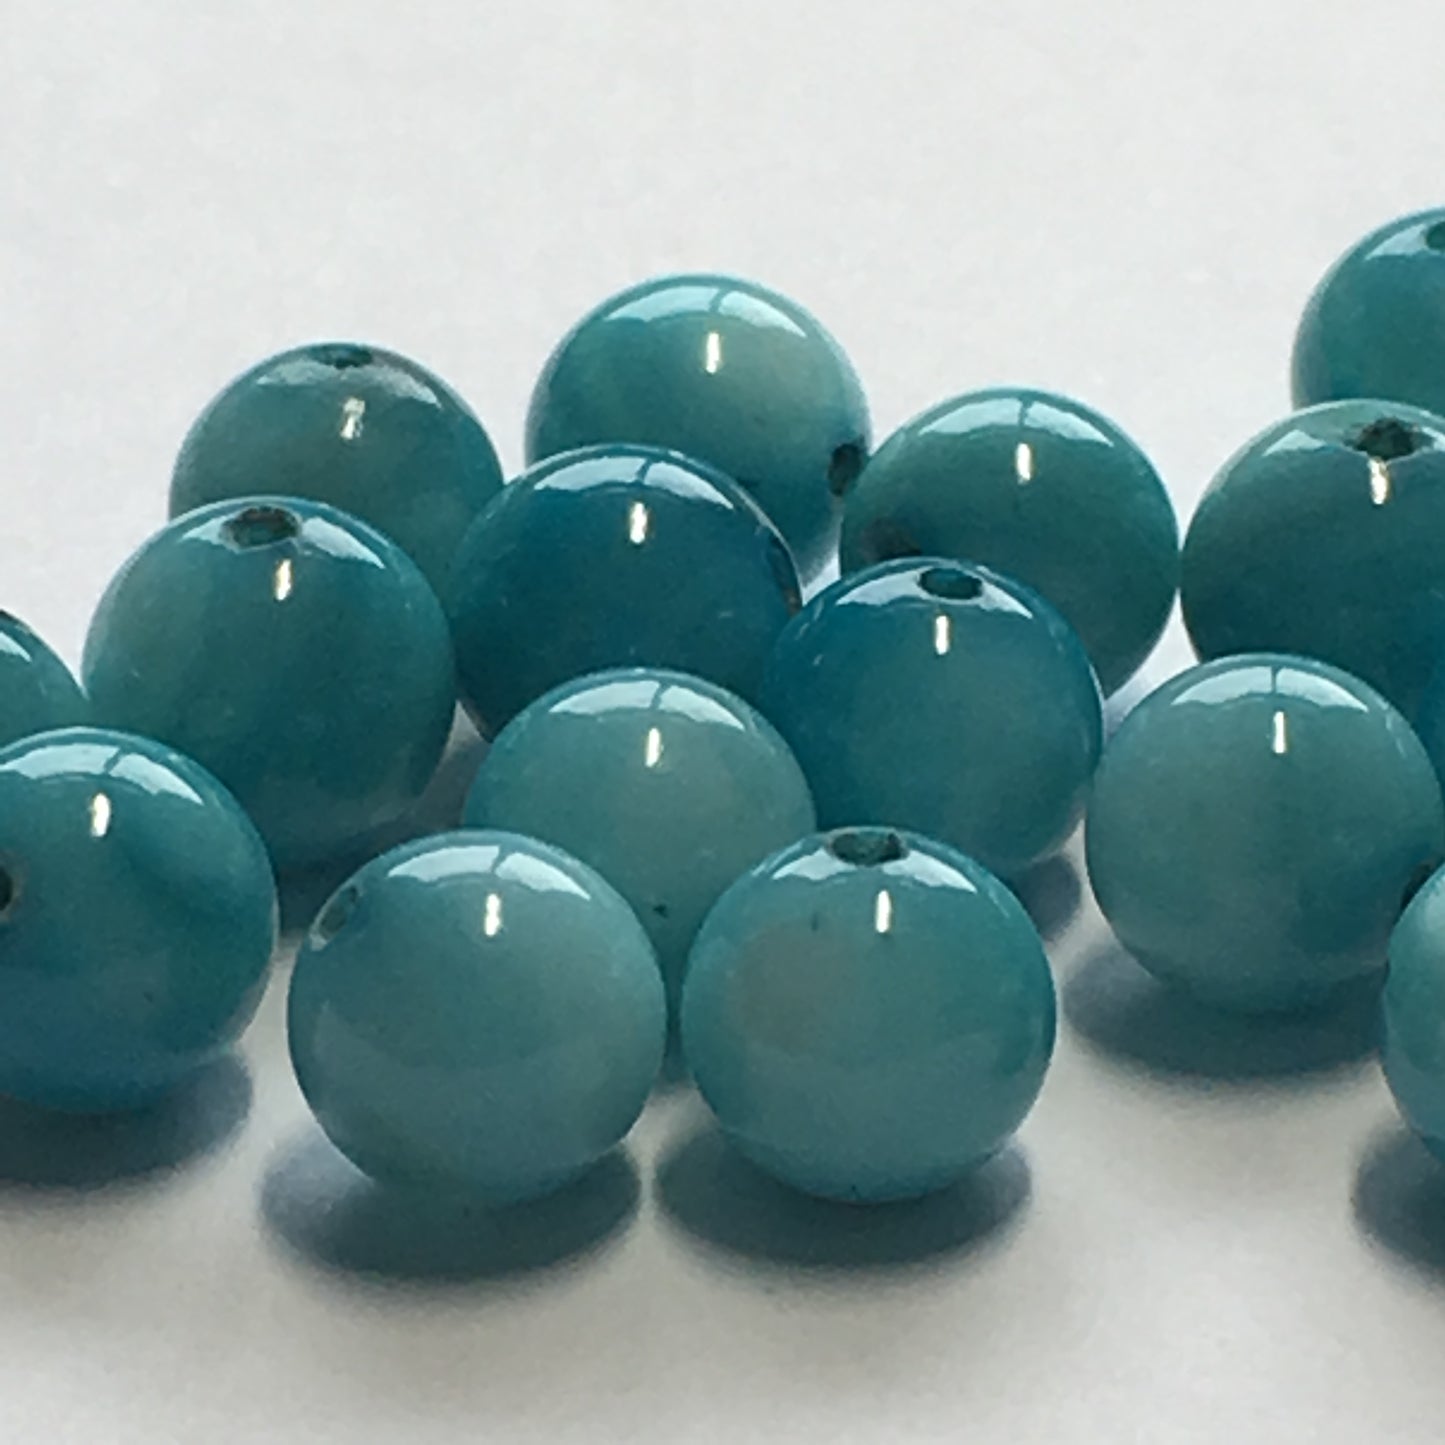 Blue Dyed Shell Round Beads, 6 mm - 26 Beads